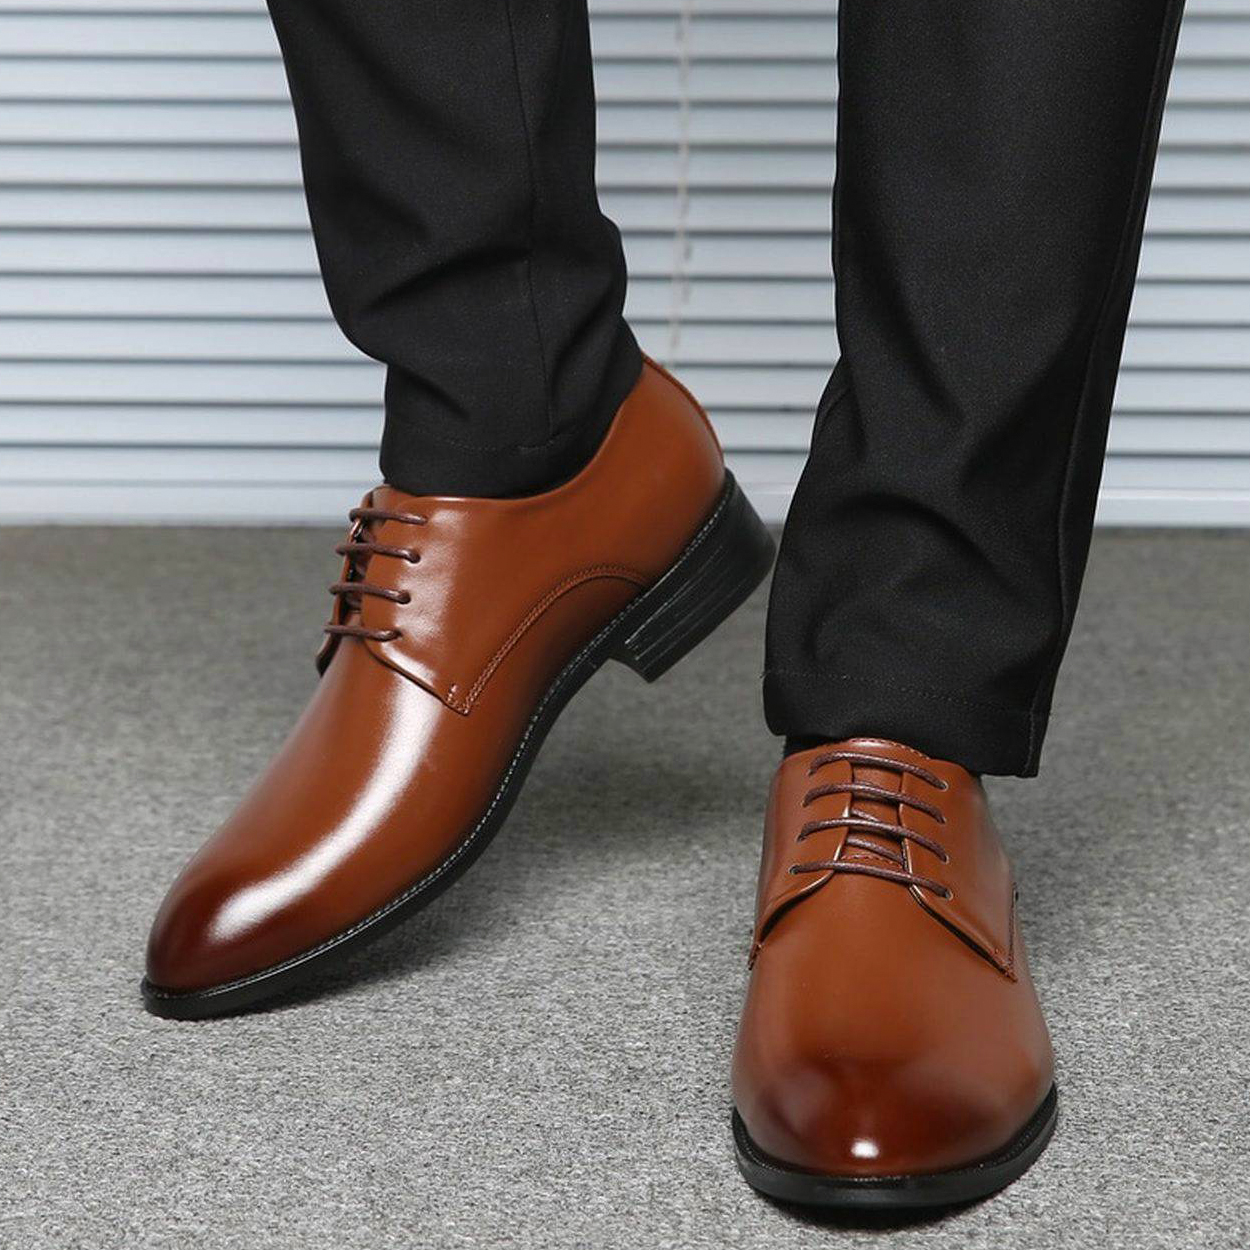 Discover 74+ shoes with black trousers - in.cdgdbentre